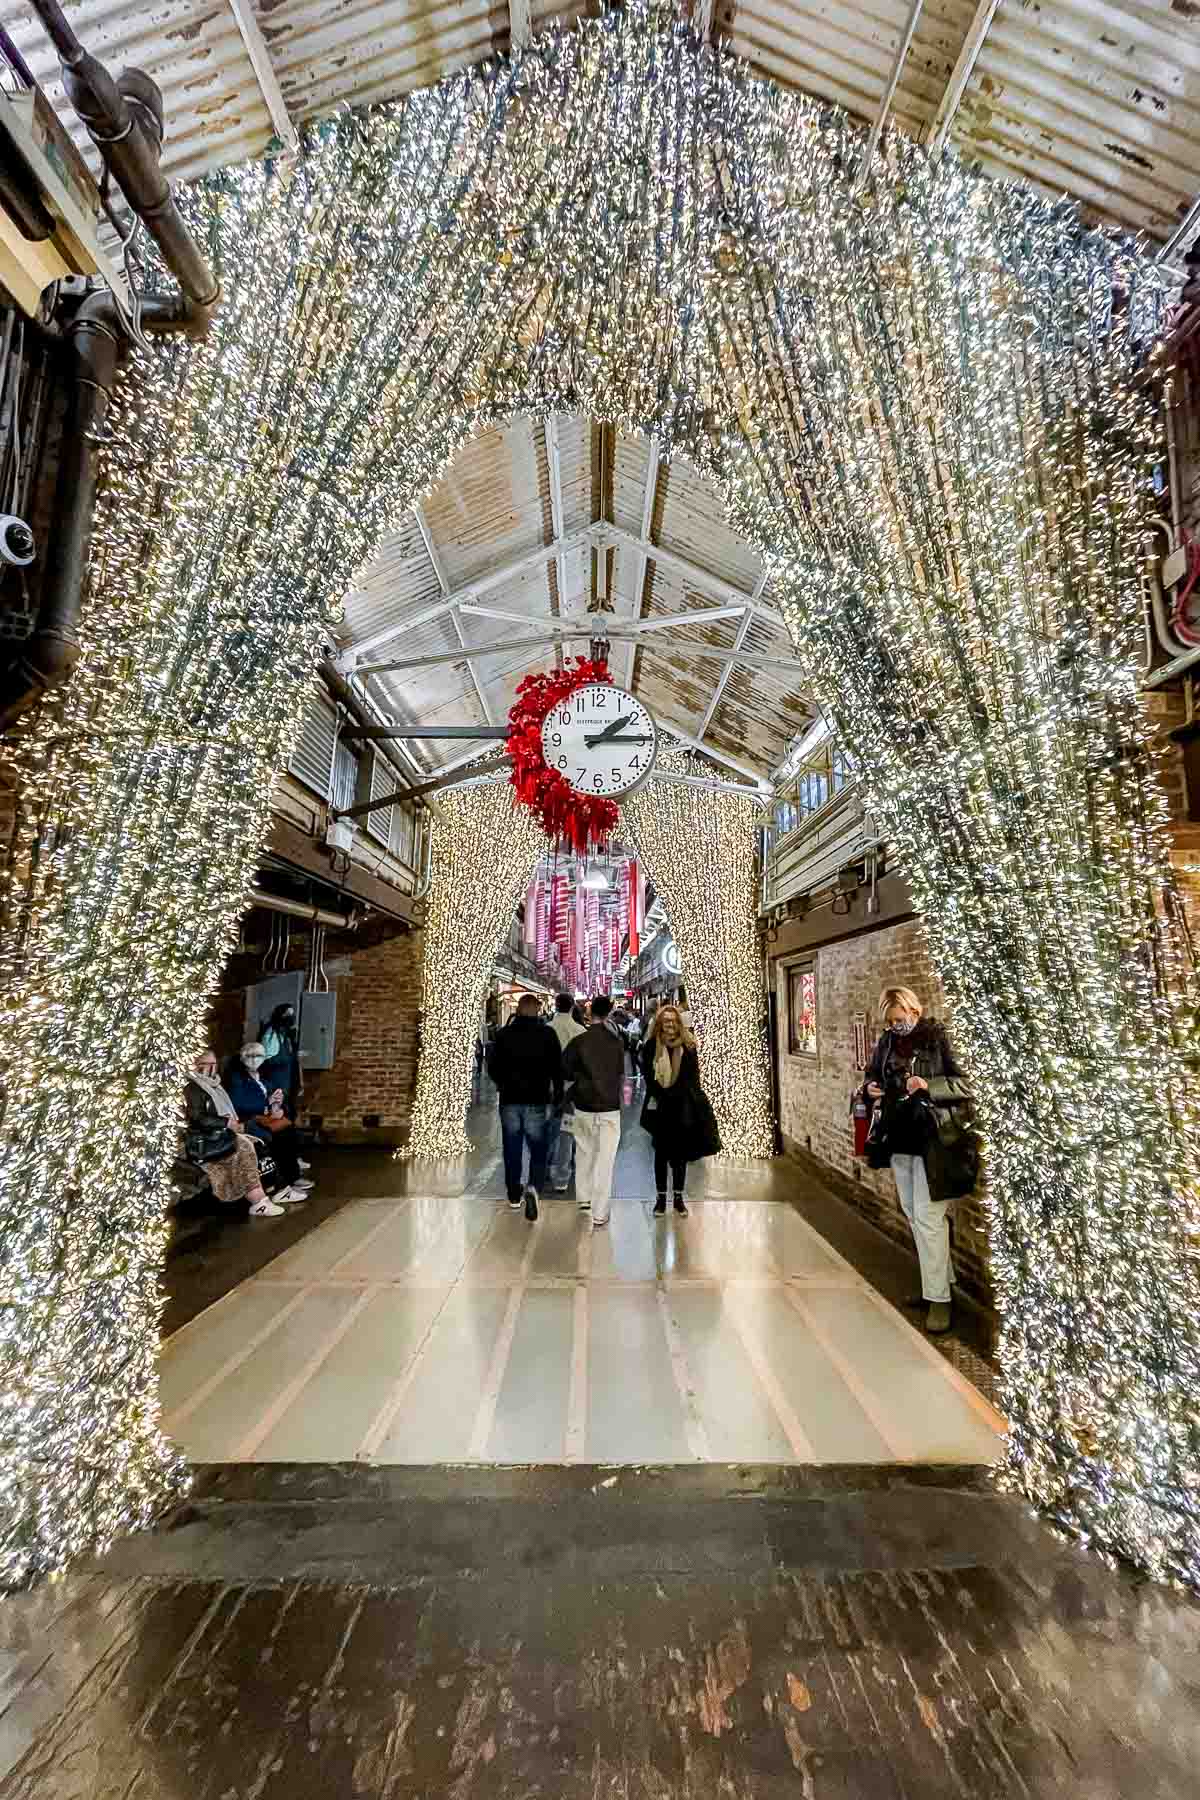 Christmas decorations at the Chelsea Market in New York